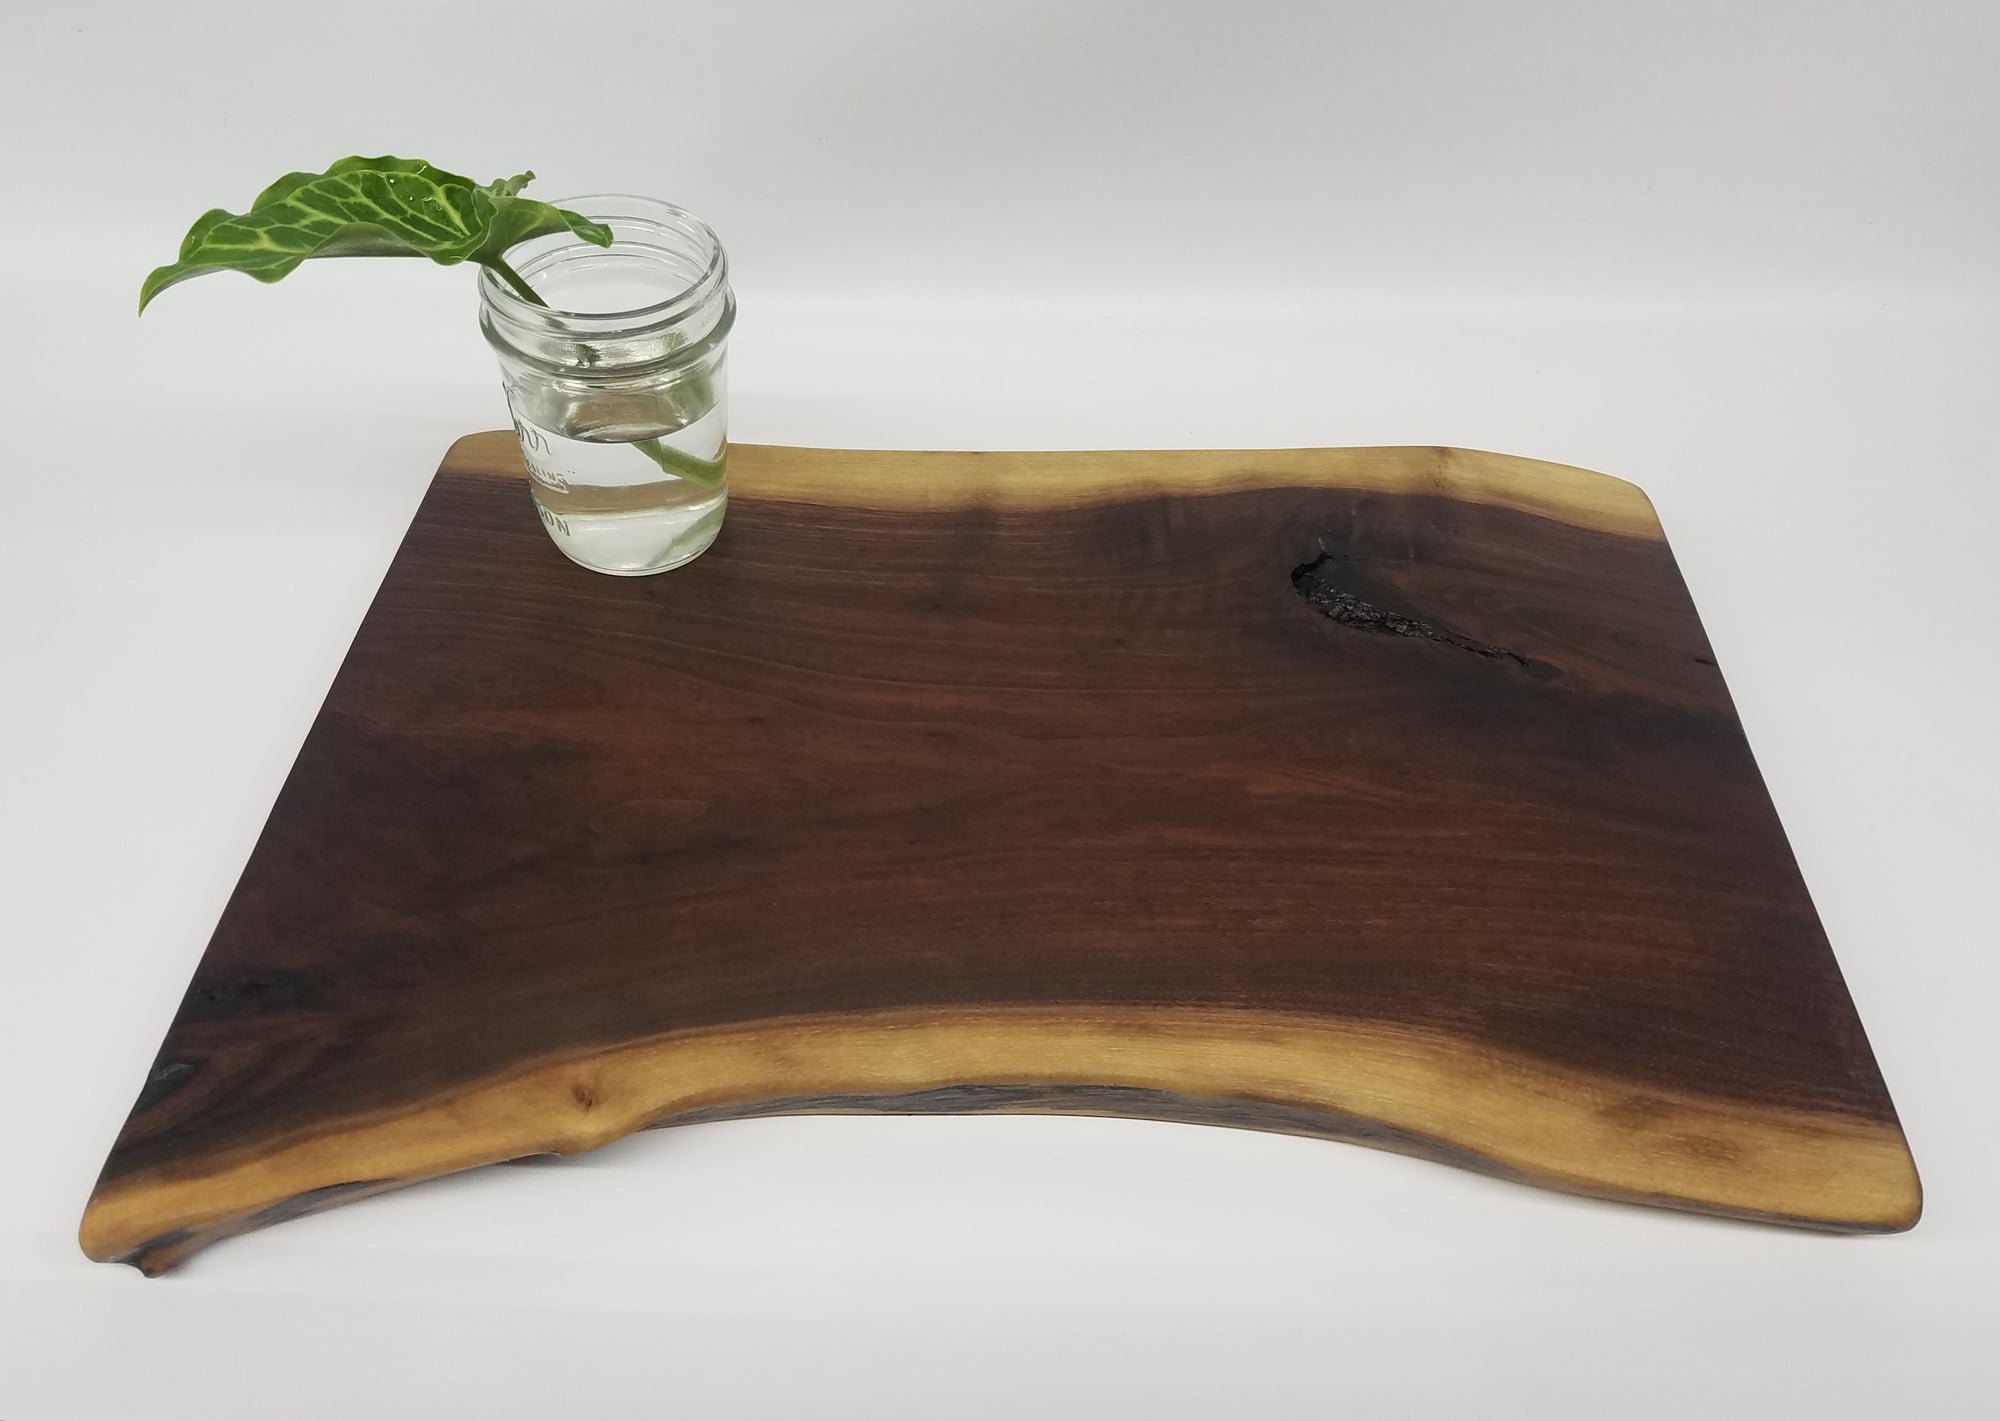 Large Serving Board- Reclaimed Hardwood- Walnut- Charcuterie- Cheese Board- Cutting Board- Bread Board- Gift- Foodie- Chef- Live Edge- Cool